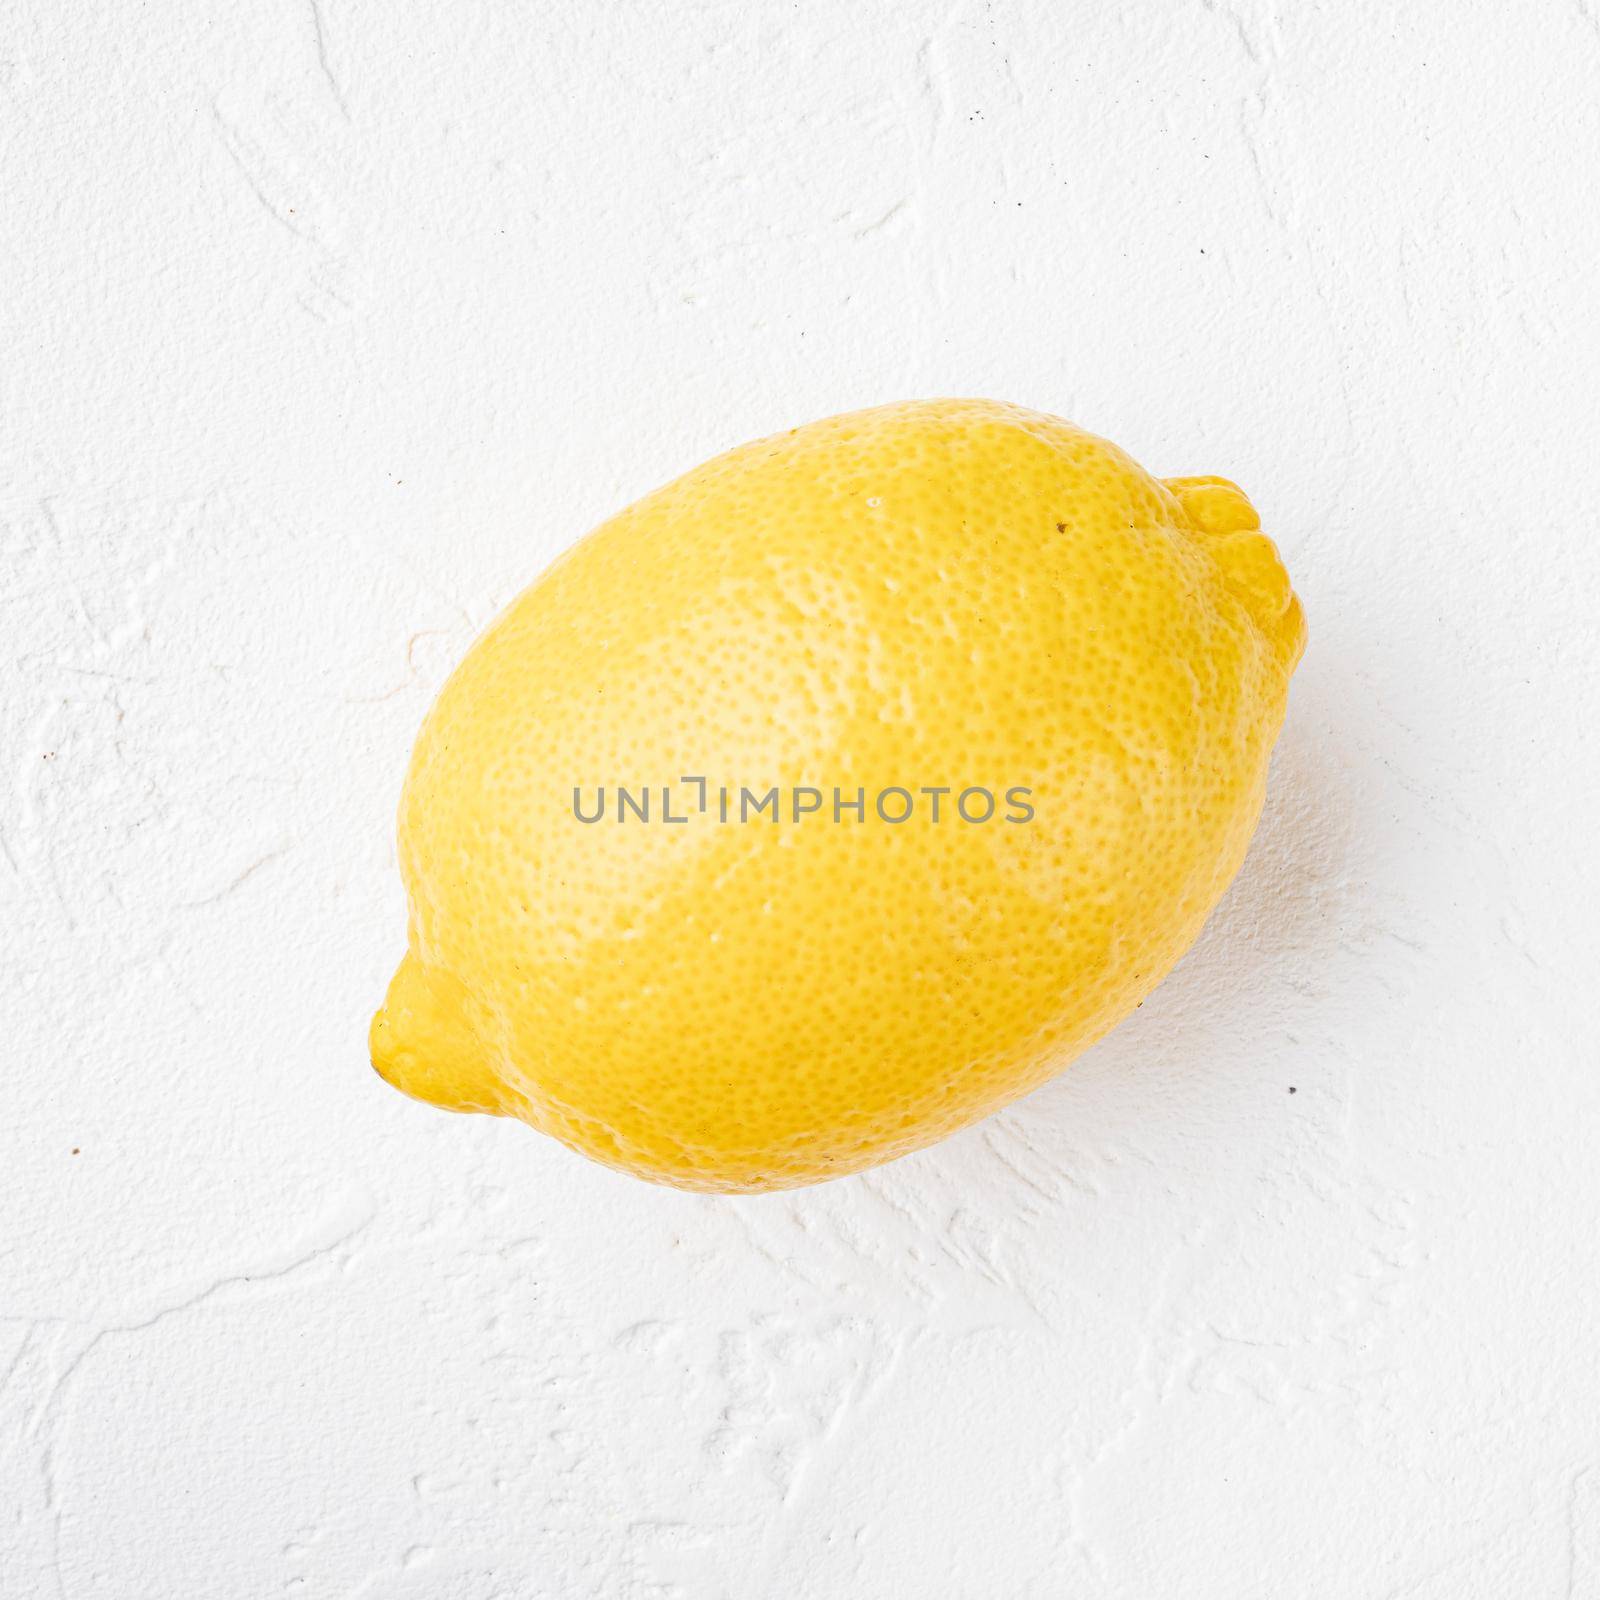 Yellow ripe lemon set, on white stone table background, with copy space for text